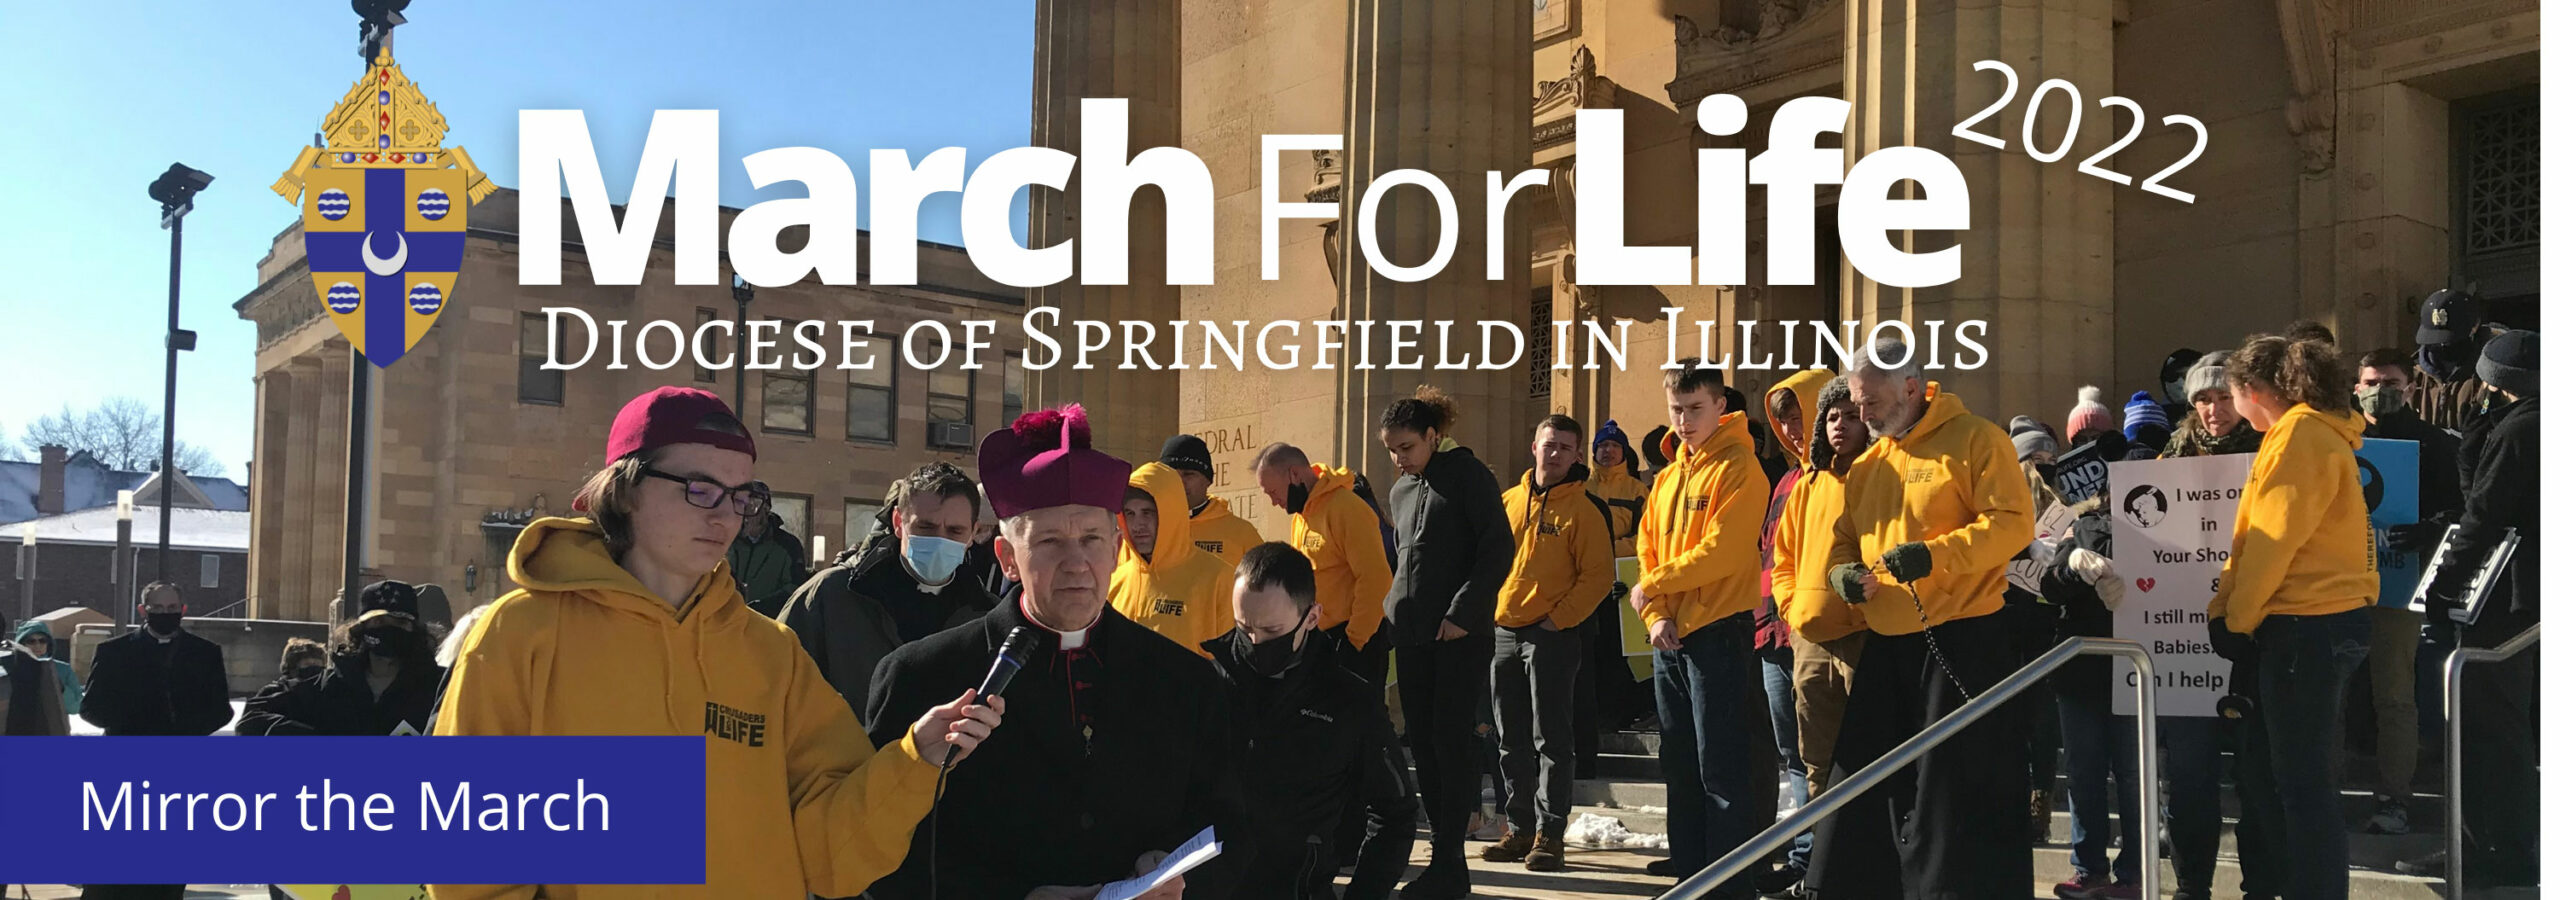 march-for-life-banner